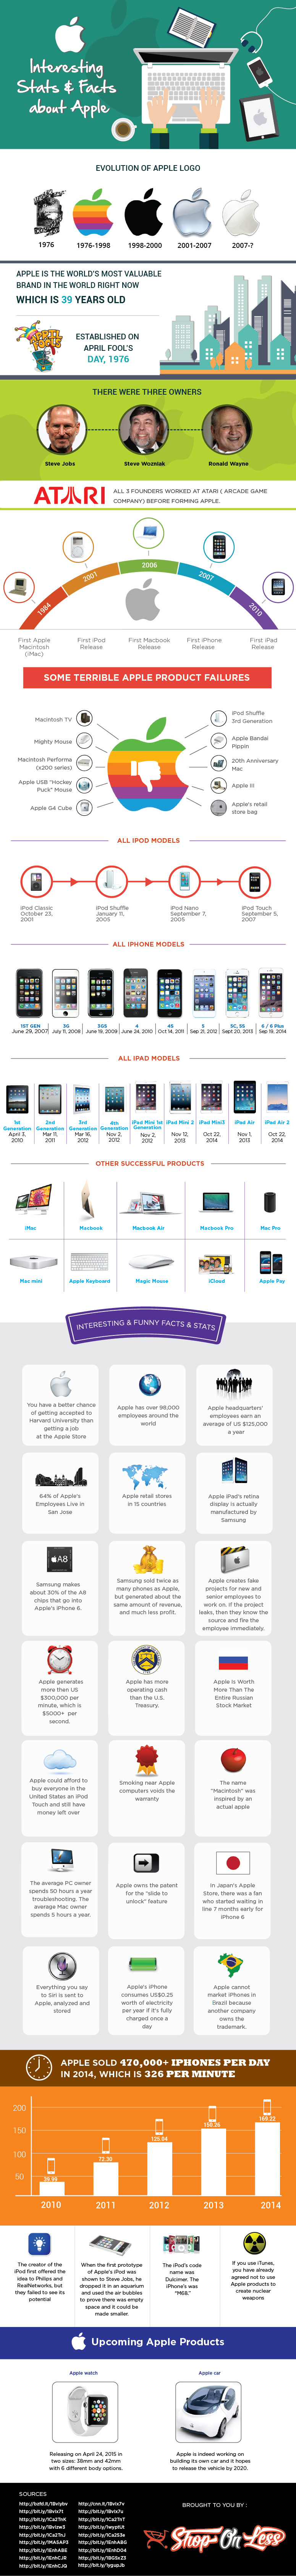 37 Interesting Facts About Apple